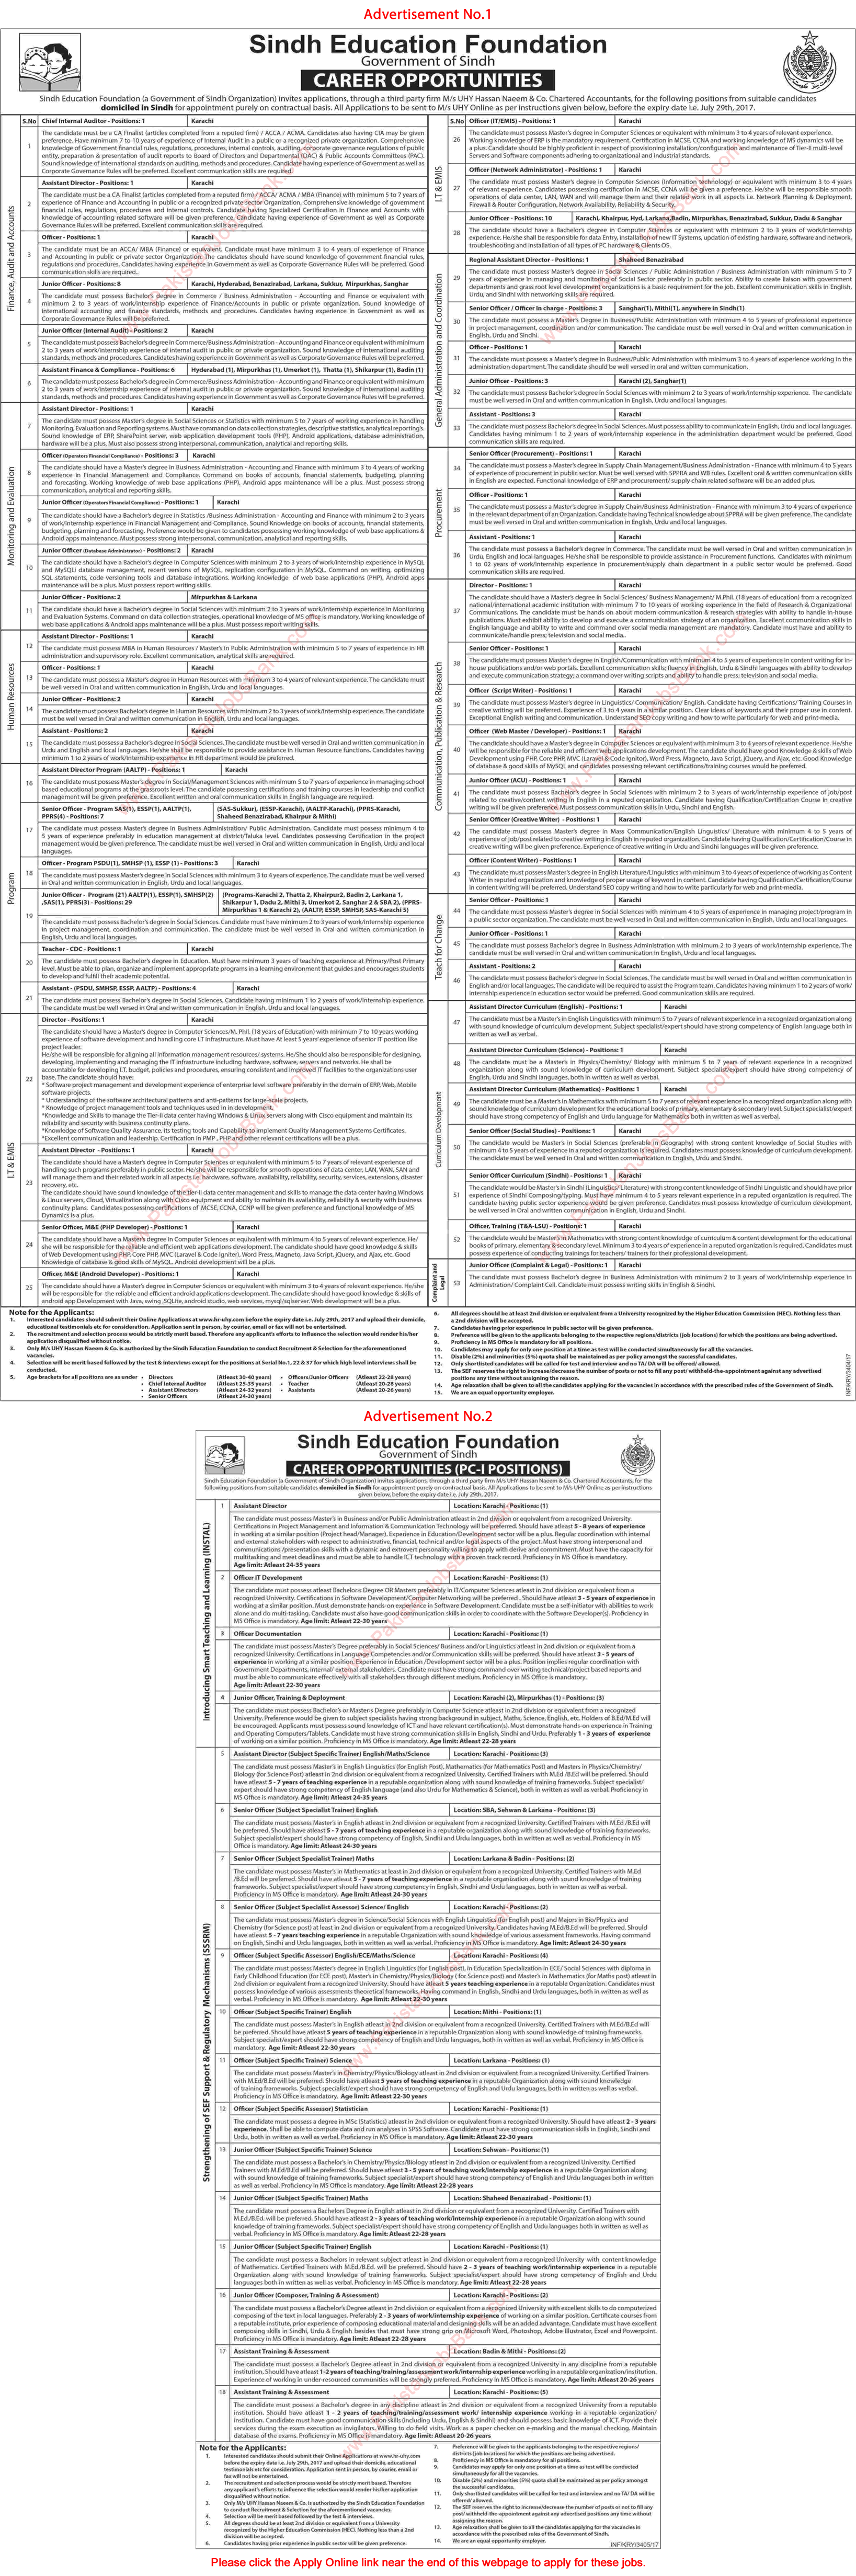 Sindh Education Foundation Jobs July 2017 Apply Online Officers, Assistants & Others SEF Latest / New